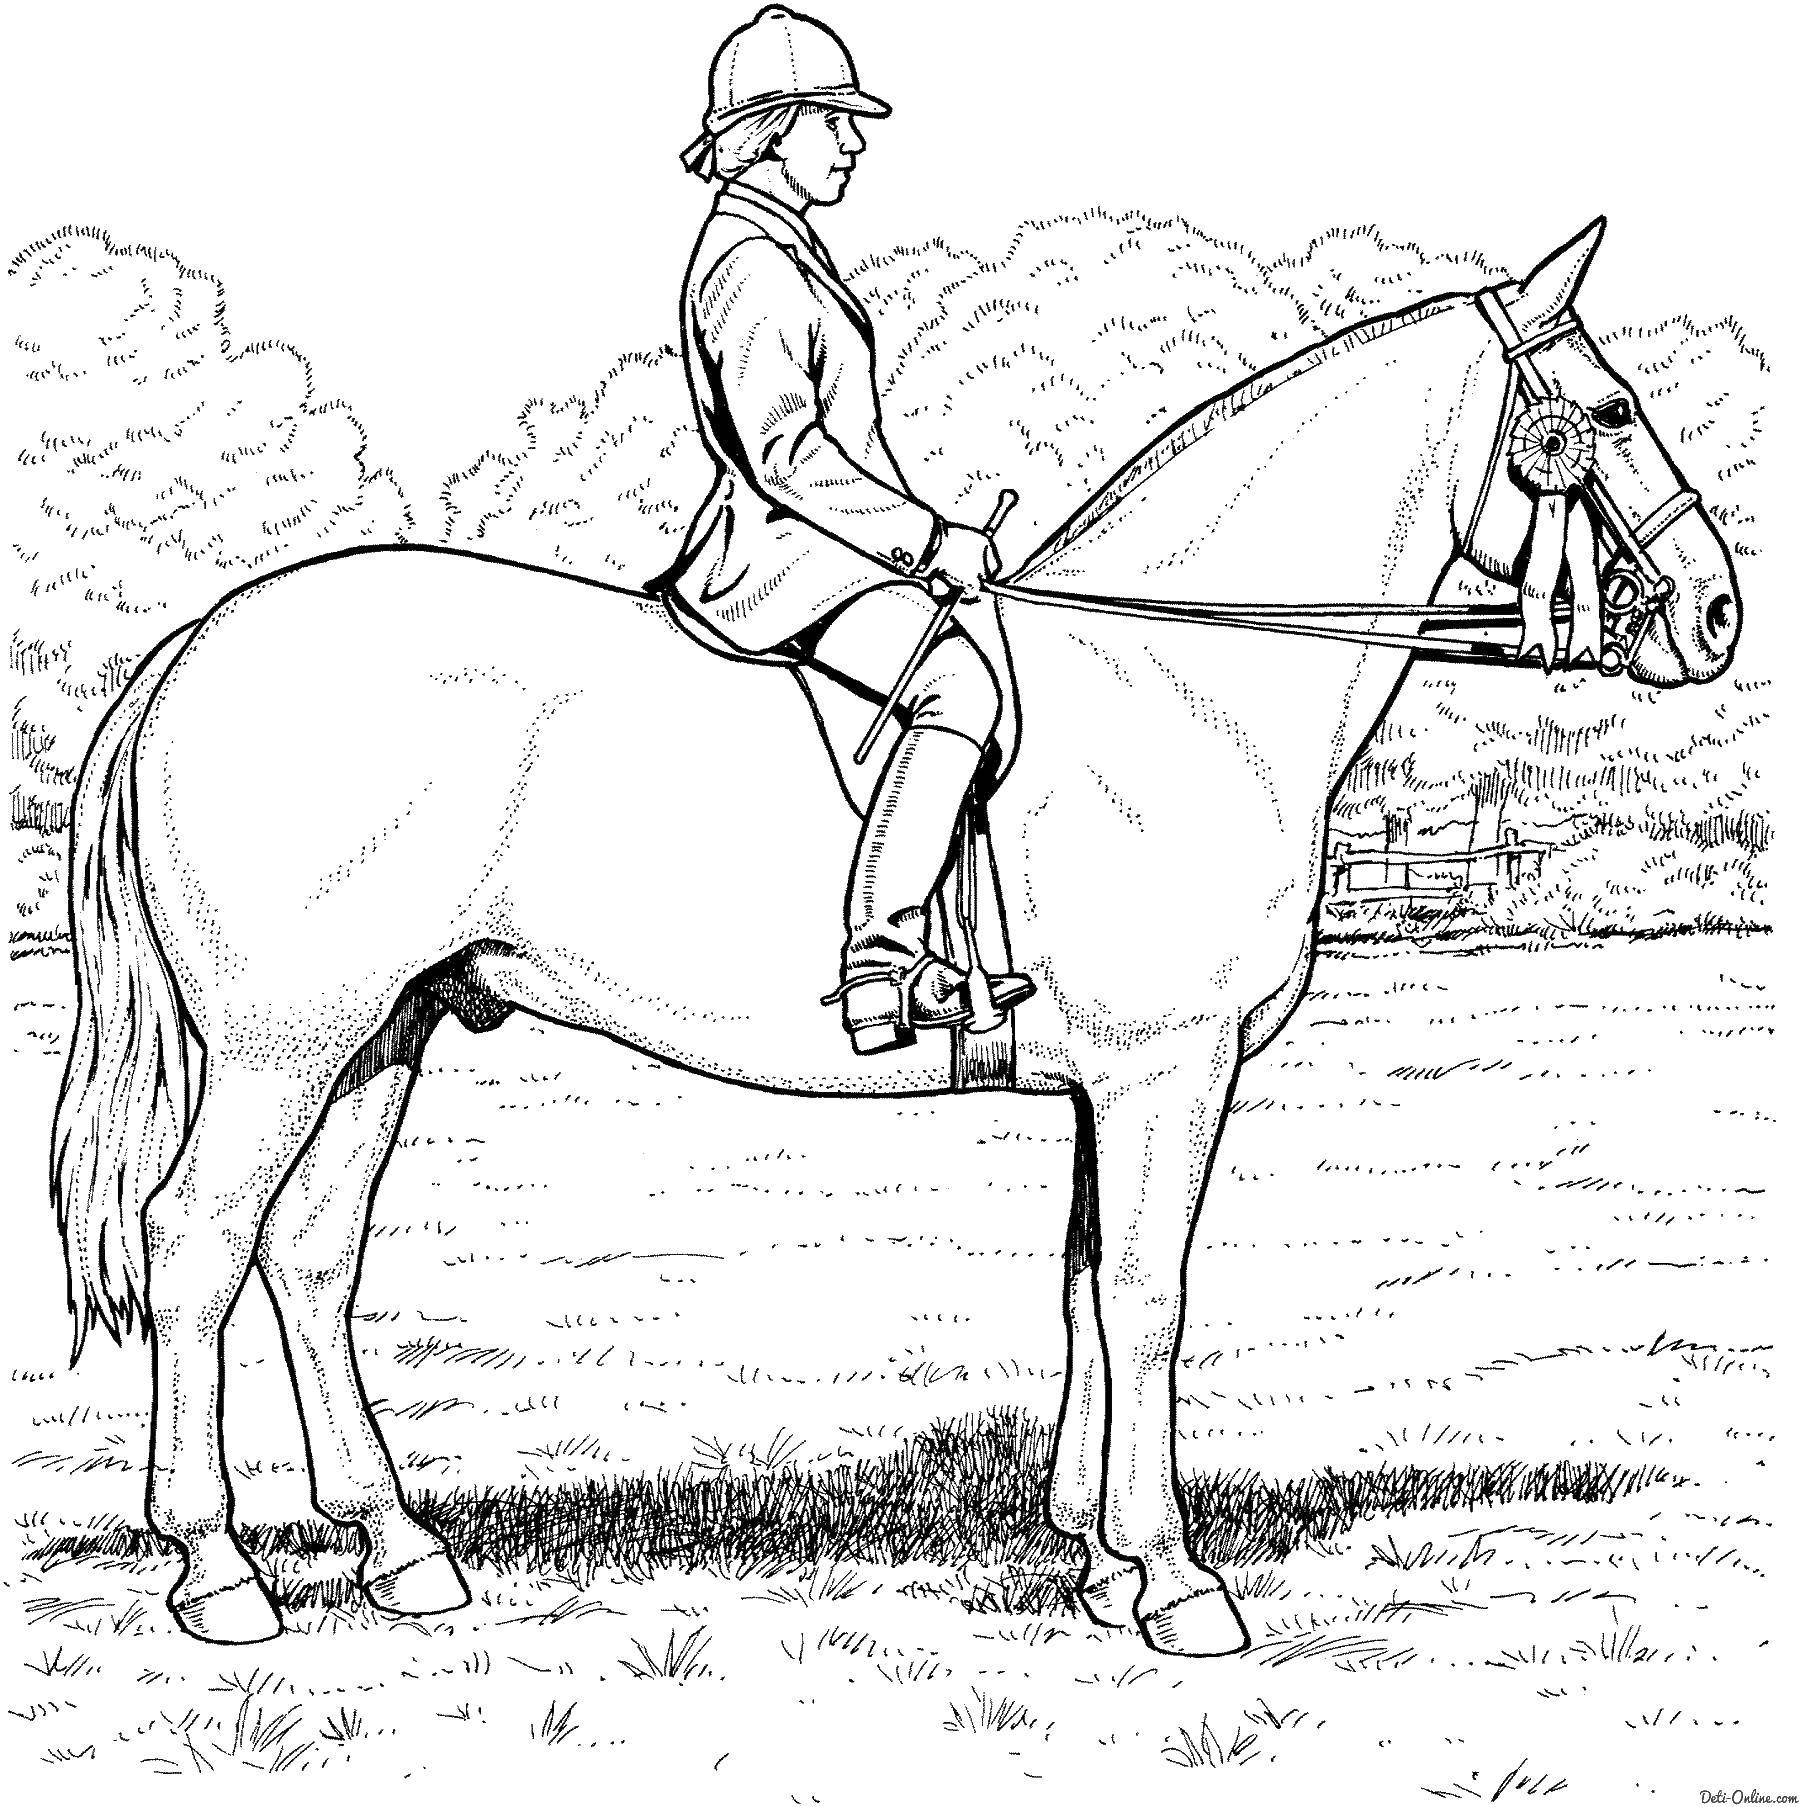 Coloring Horse with rider. Category horse. Tags:  The horse, rider.